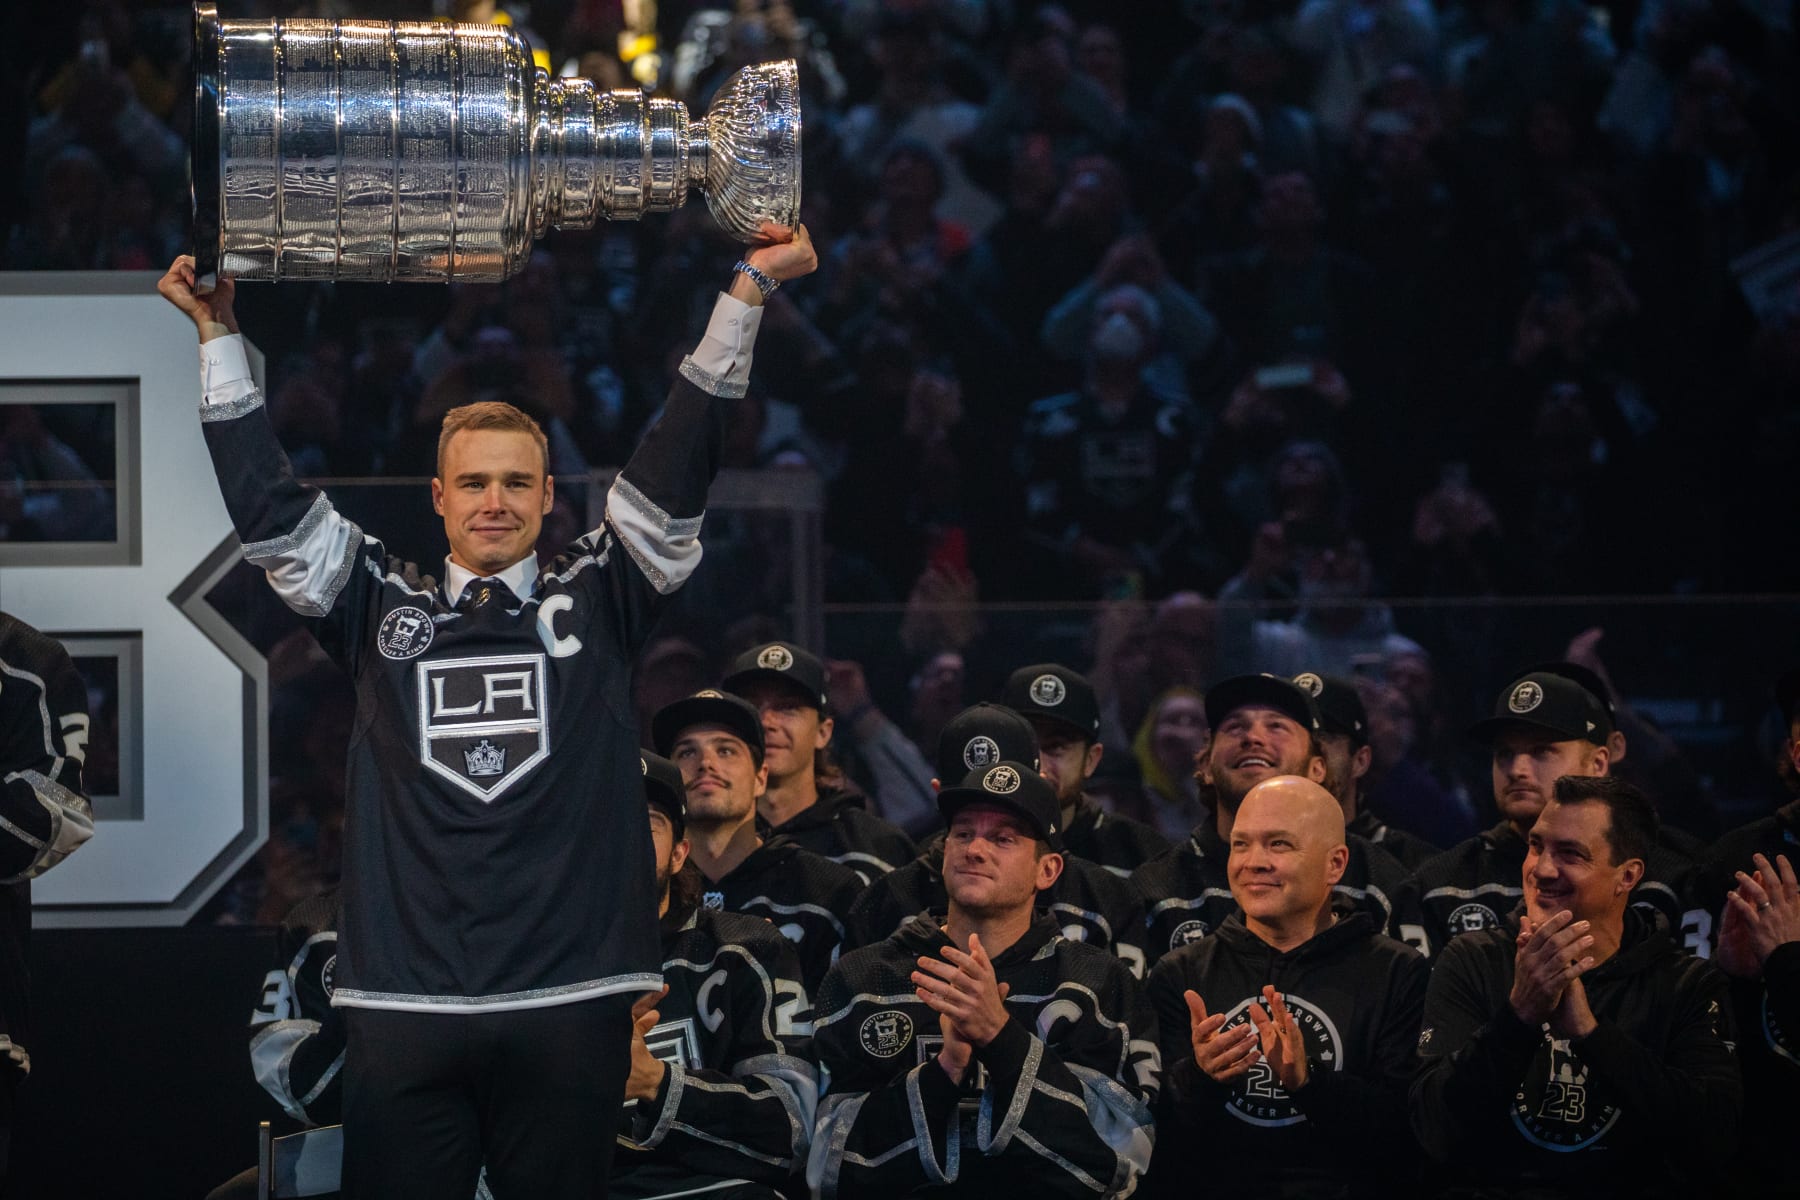 Dustin Brown To Be Inducted Into U.S. Hockey Hall of Fame